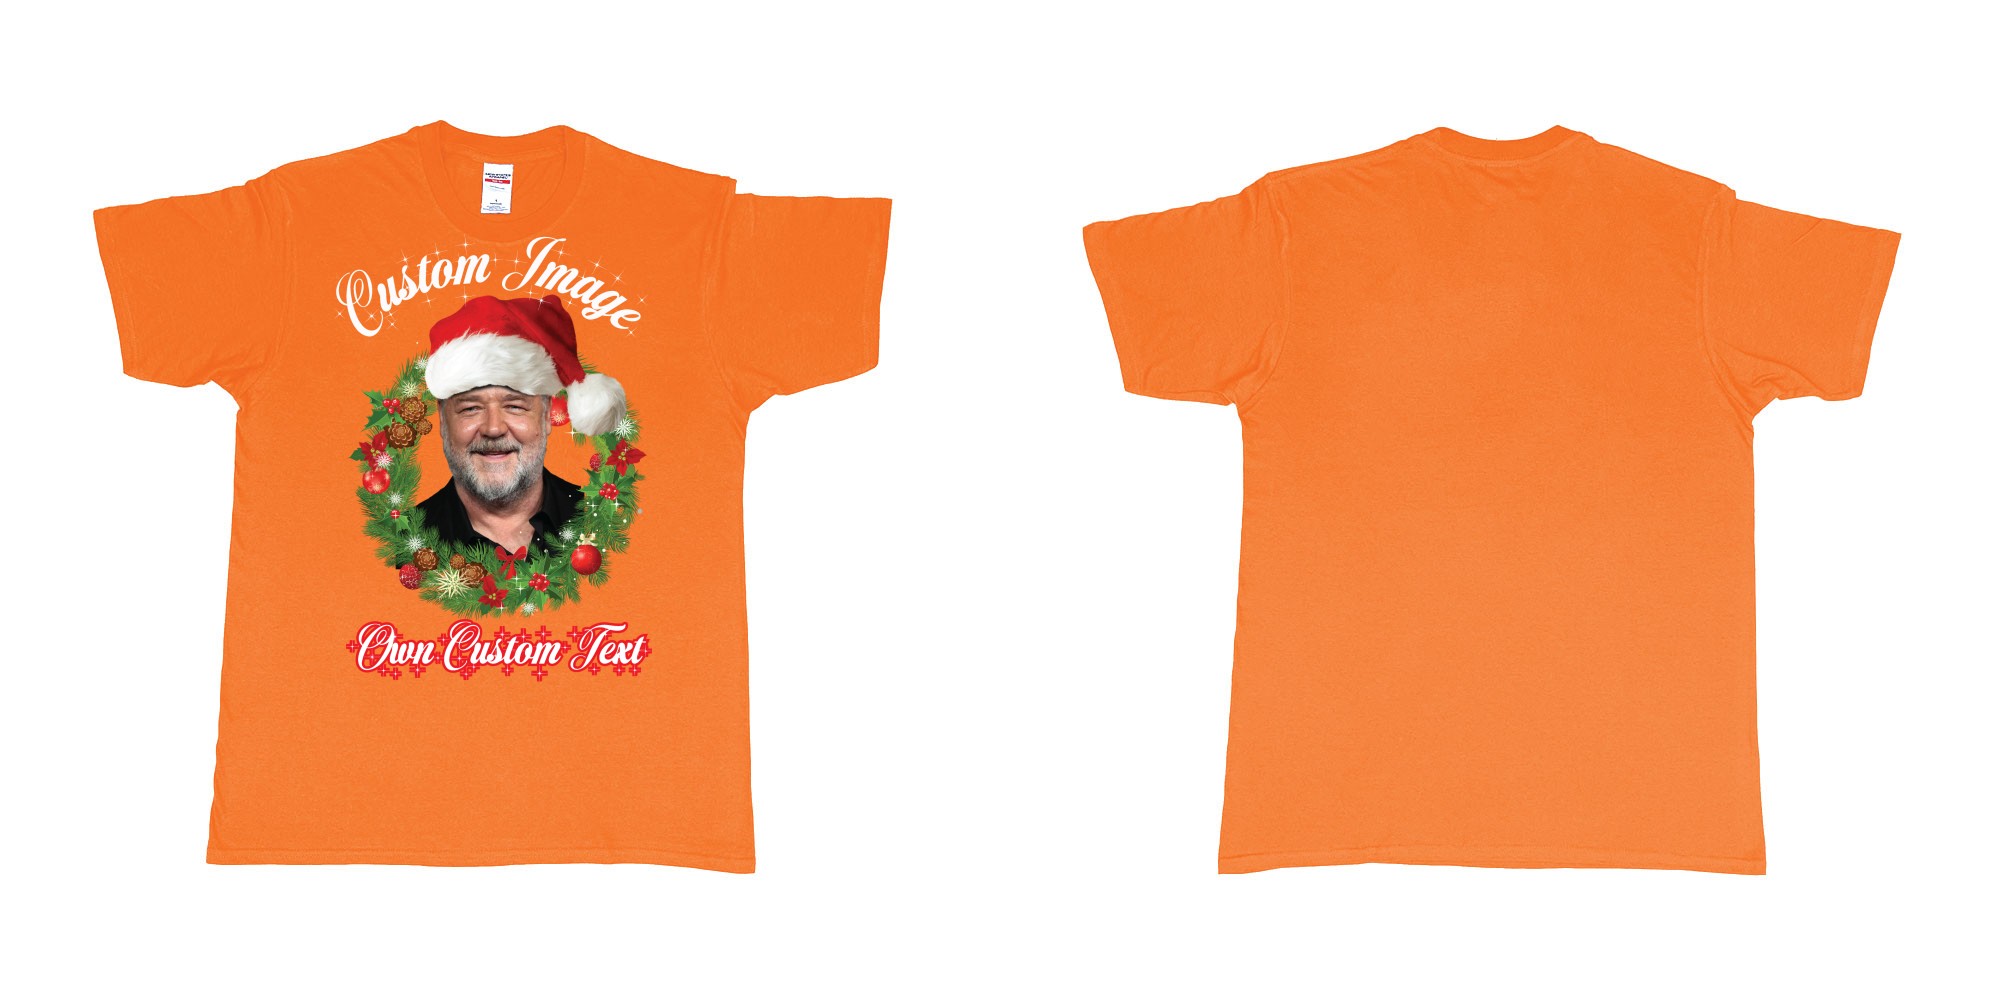 Custom tshirt design christmas wreath custom face image text in fabric color orange choice your own text made in Bali by The Pirate Way